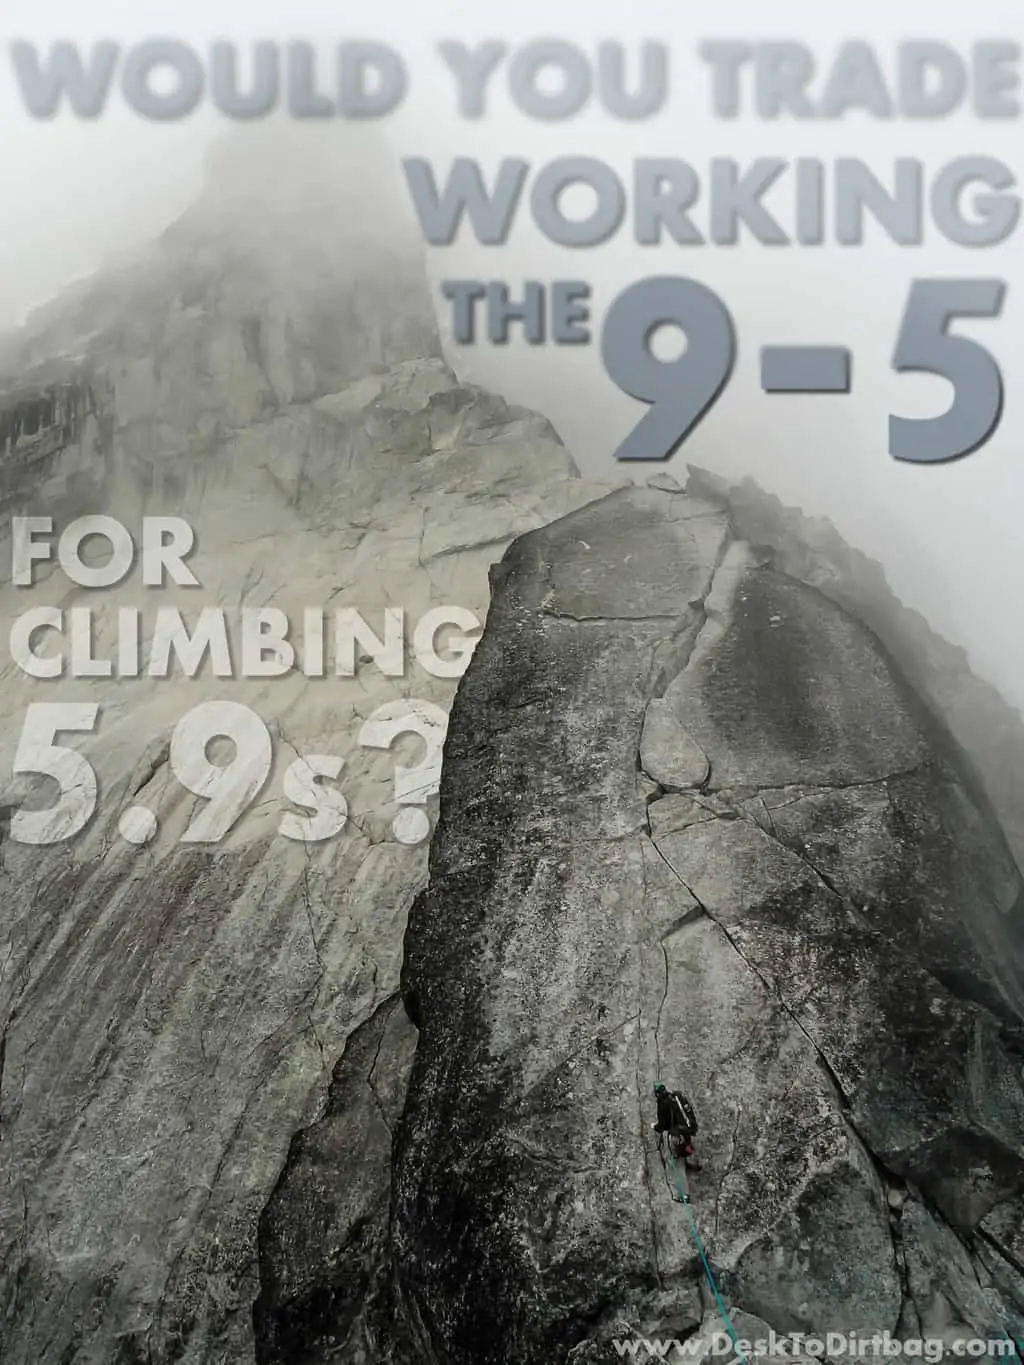 Trade the 9-5 for climbing 5.9s